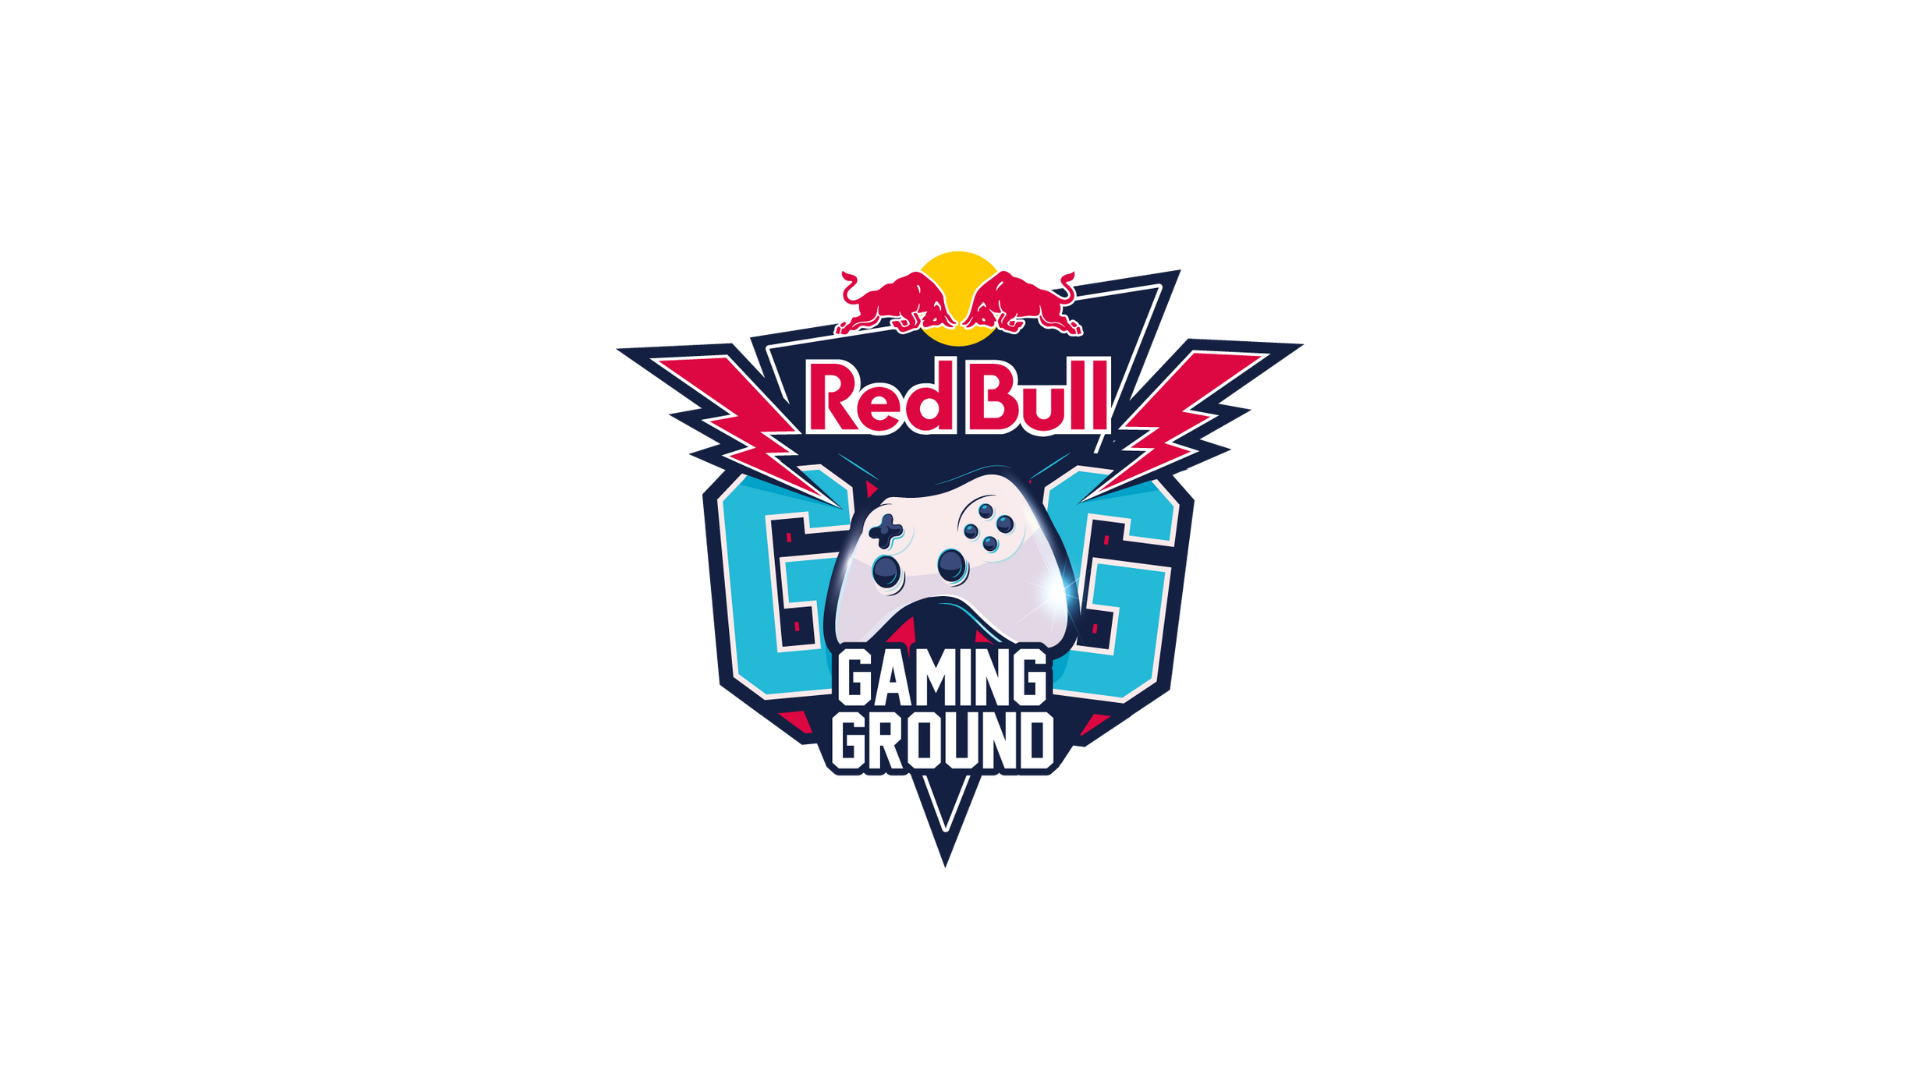 https://www.levelup-salzburg.at/wp-content/uploads/2021/11/Red_Bull_Gaming_Ground_Logo.png